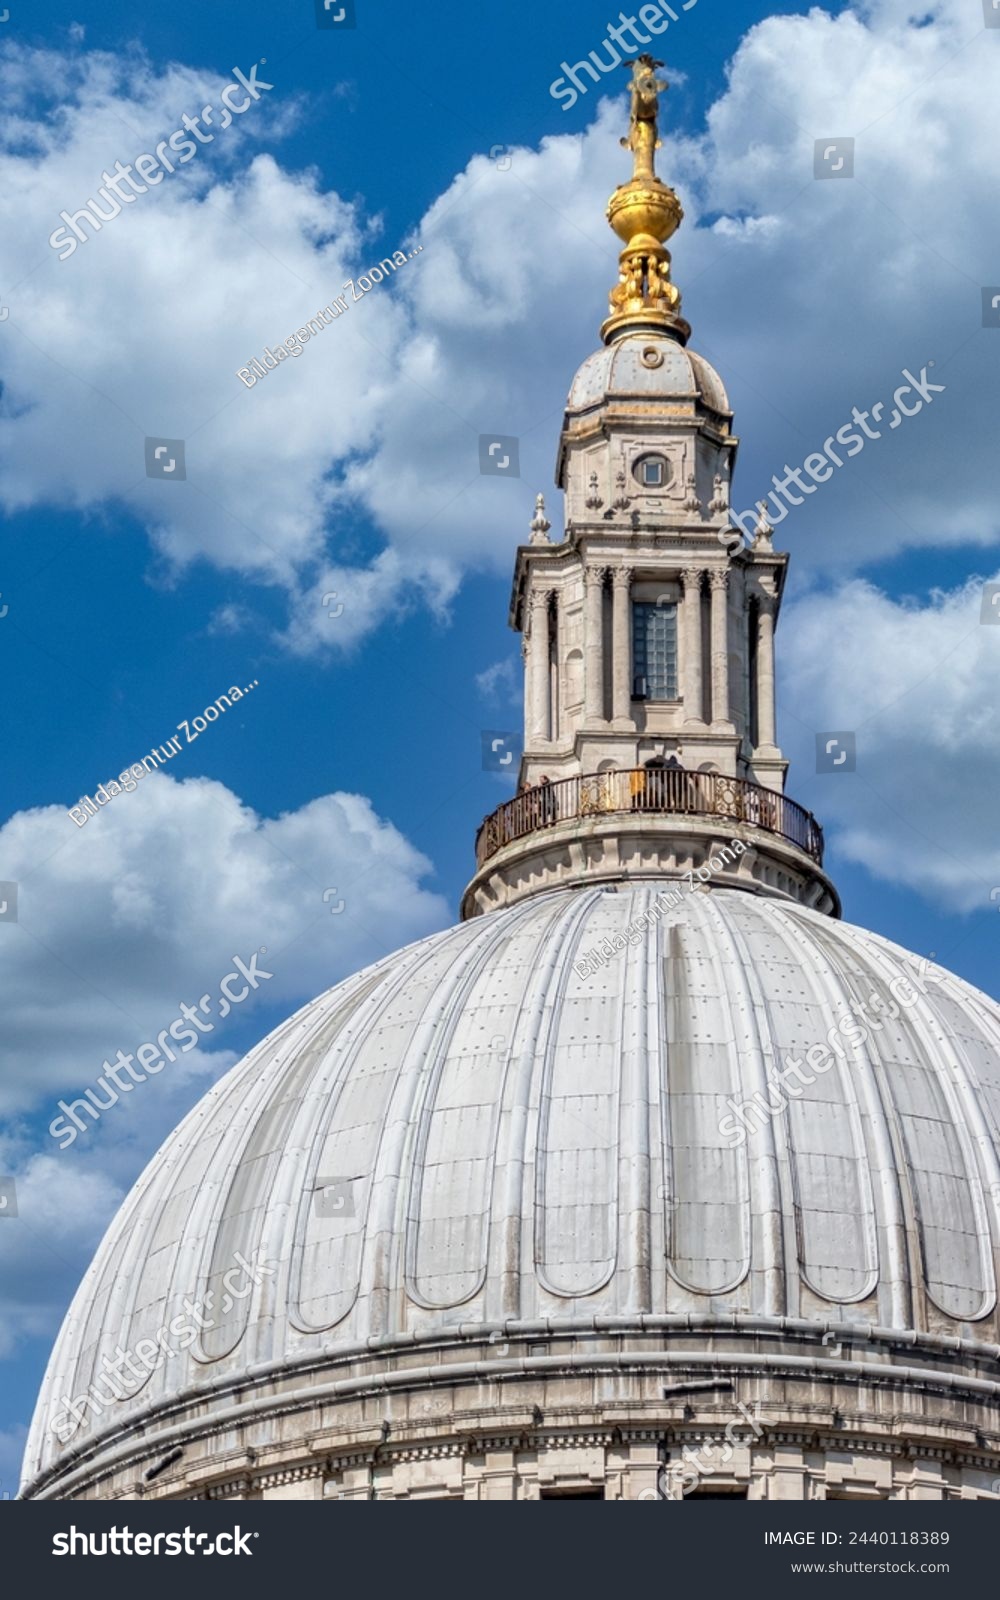 LONDONUK - MARCH 21 : Close up View of St Pauls Cathedral in London on March 21, 2018. Unidentified People. #2440118389